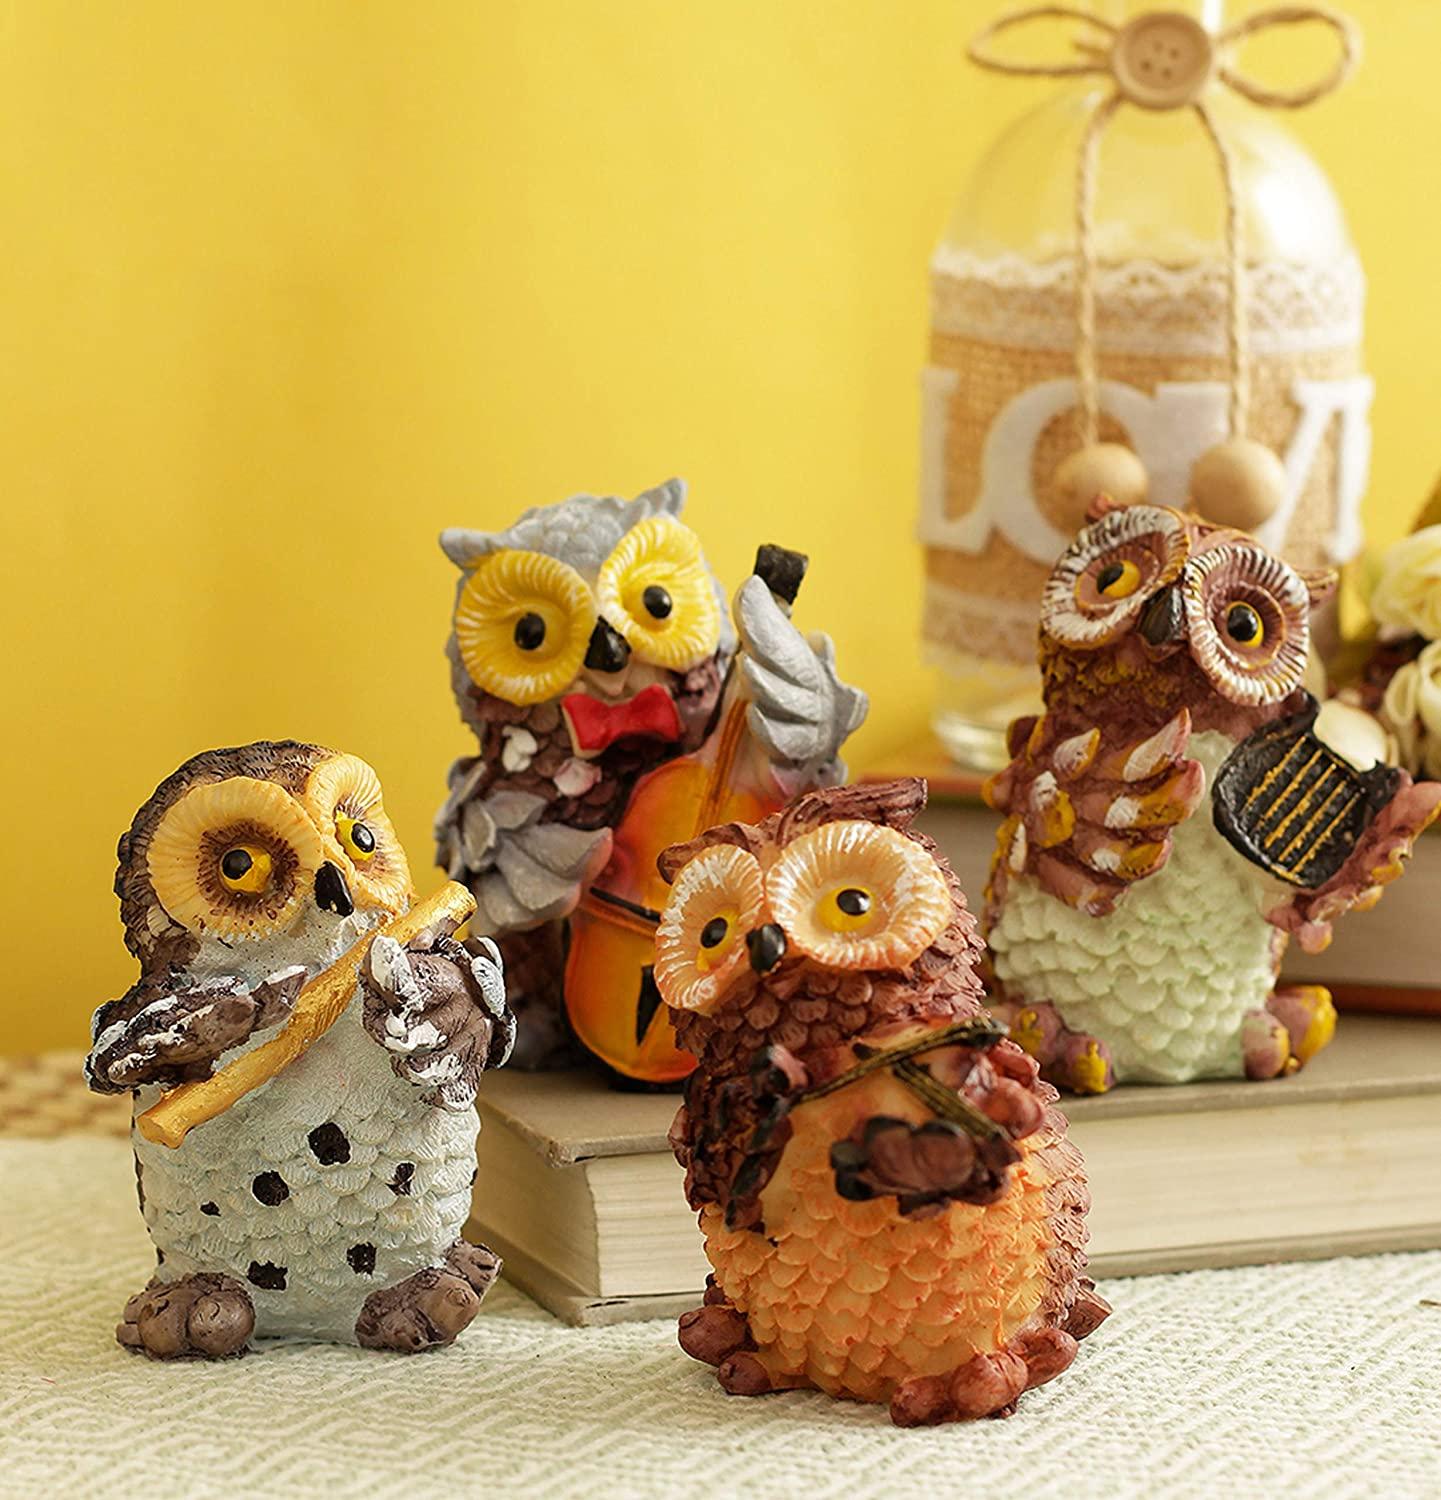 Showpiece Figurines Musical Instruments Playing 4 Owls Garden Statues For Décor - Walgrow.com